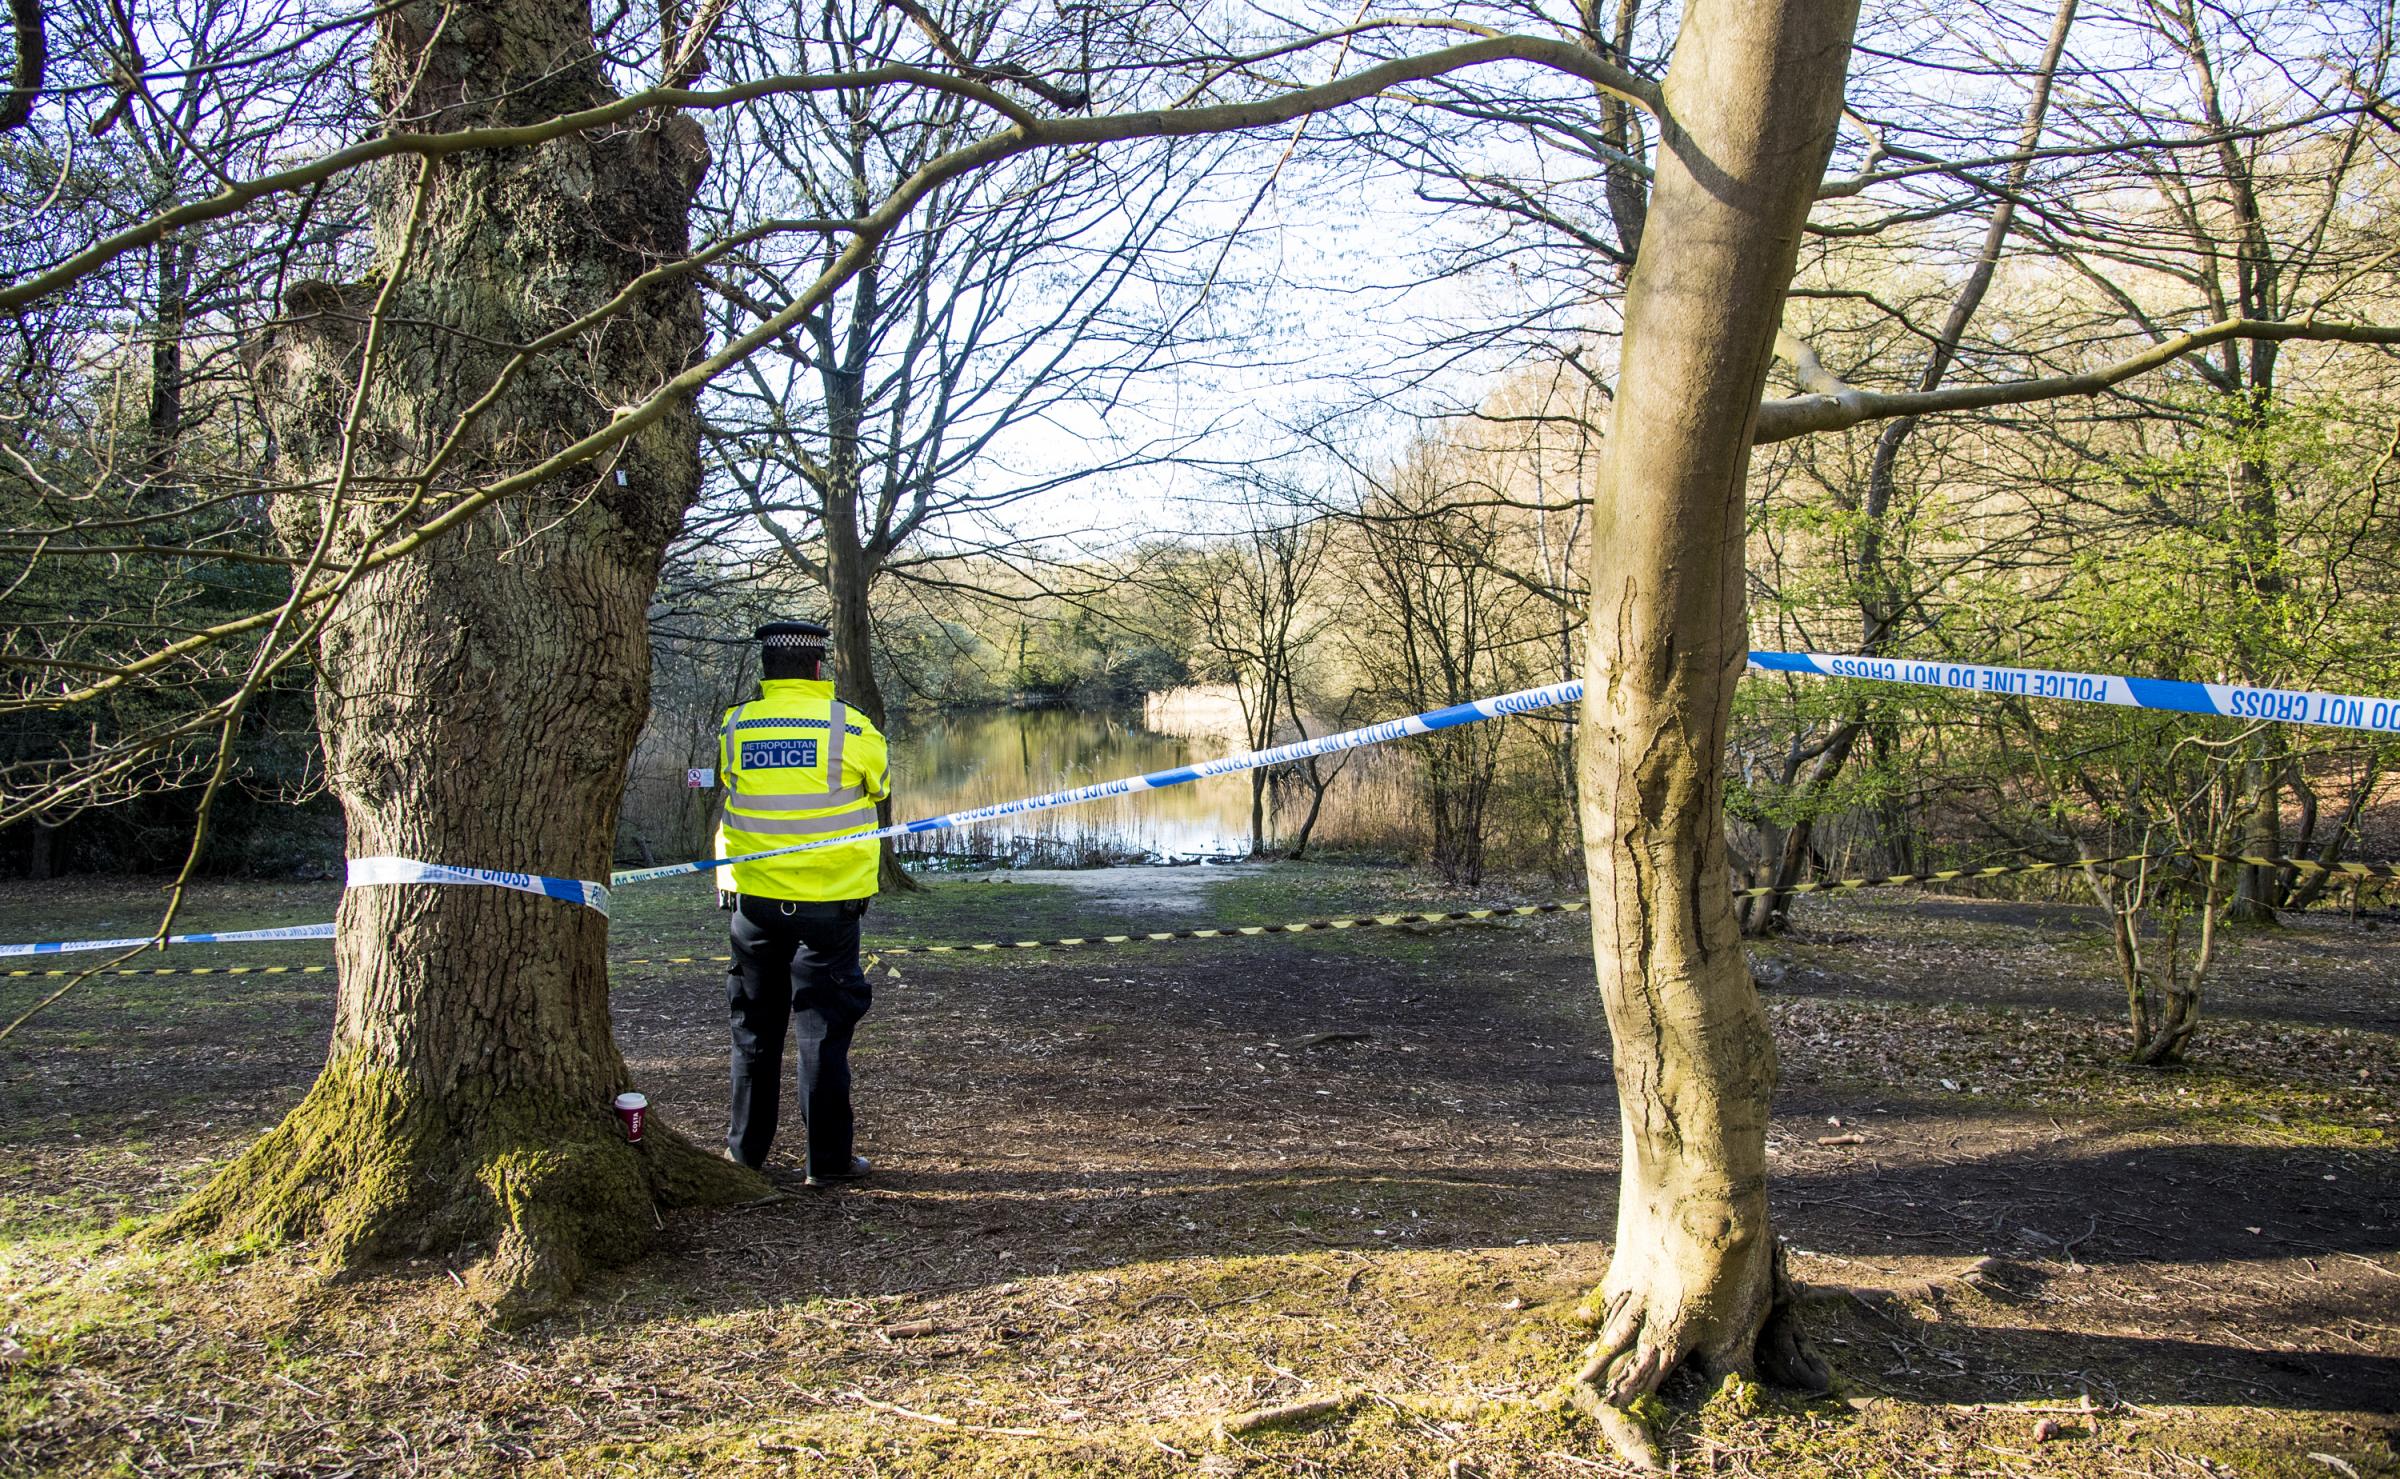 Metropolitan Police officers at the scene at the Wake Valley pond in Epping Forest following the discovery of the body. Photo: PA